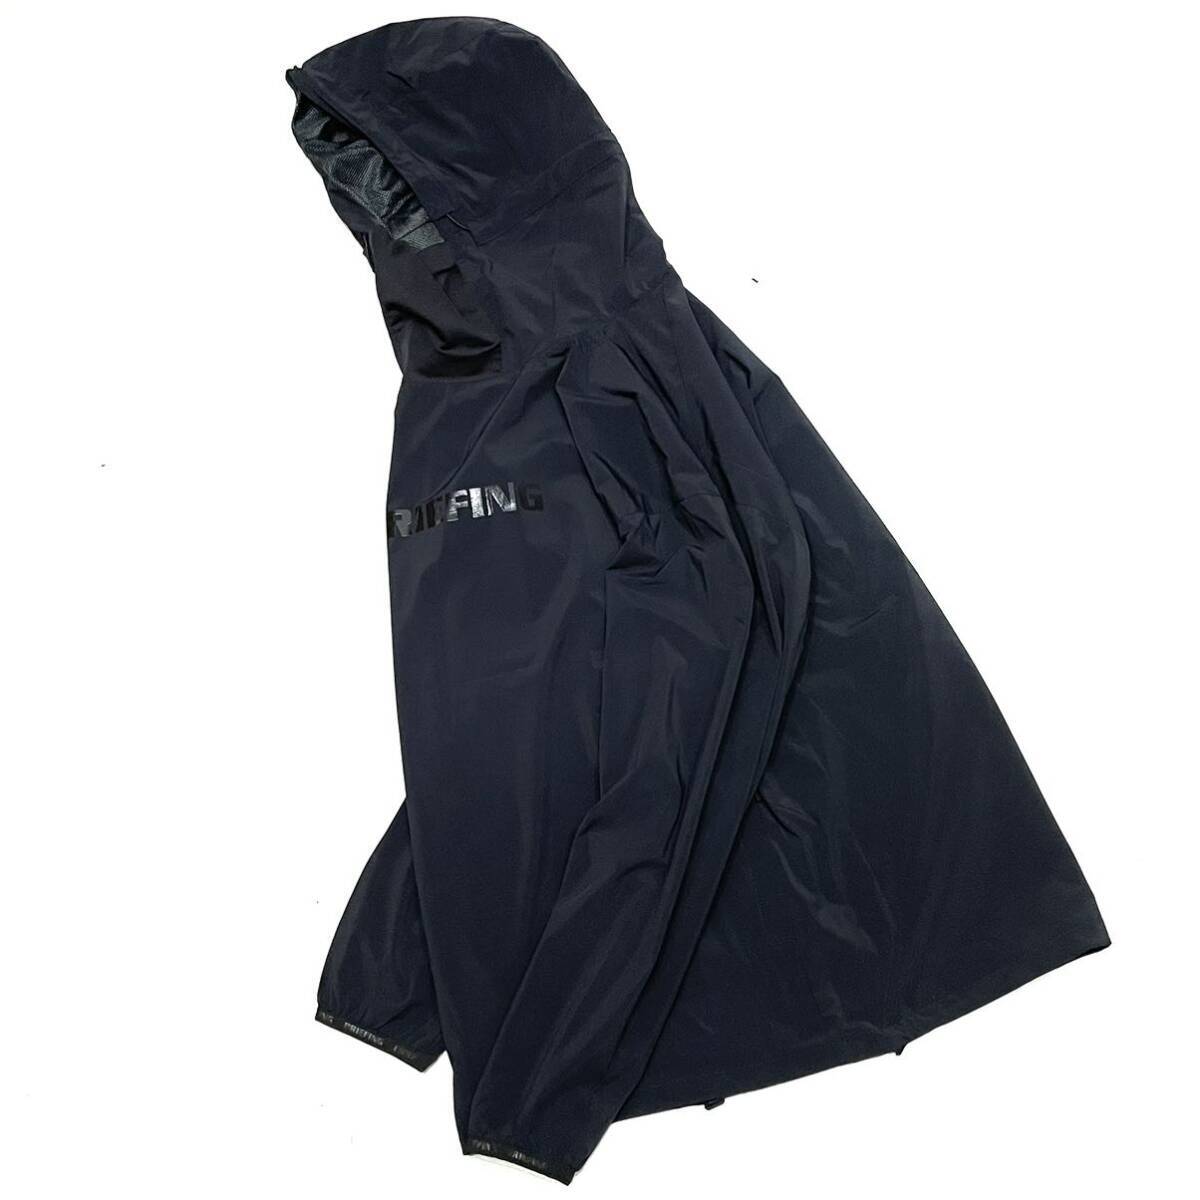  new goods domestic regular goods BRIEFING GOLF 22FW Briefing Golf Mens Wind Hoodie BRG223M19 Wind f-ti- Parker super water repelling processing M black 